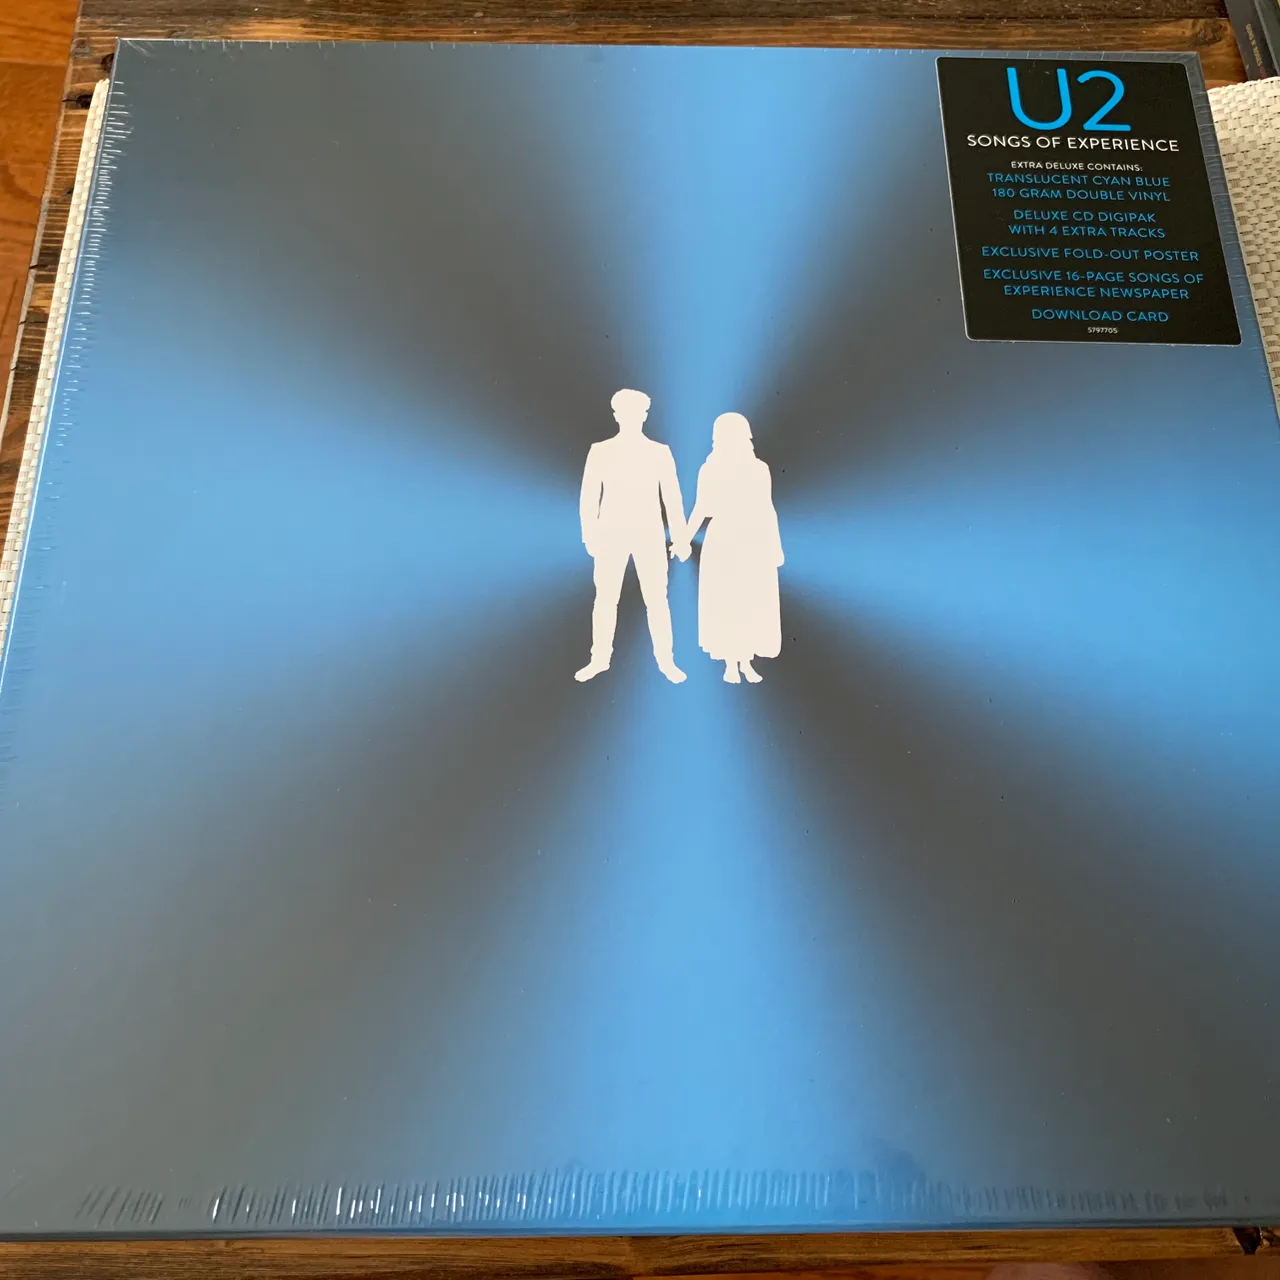 U2 - Songs of Experience (Brand New Delux Package) photo 1